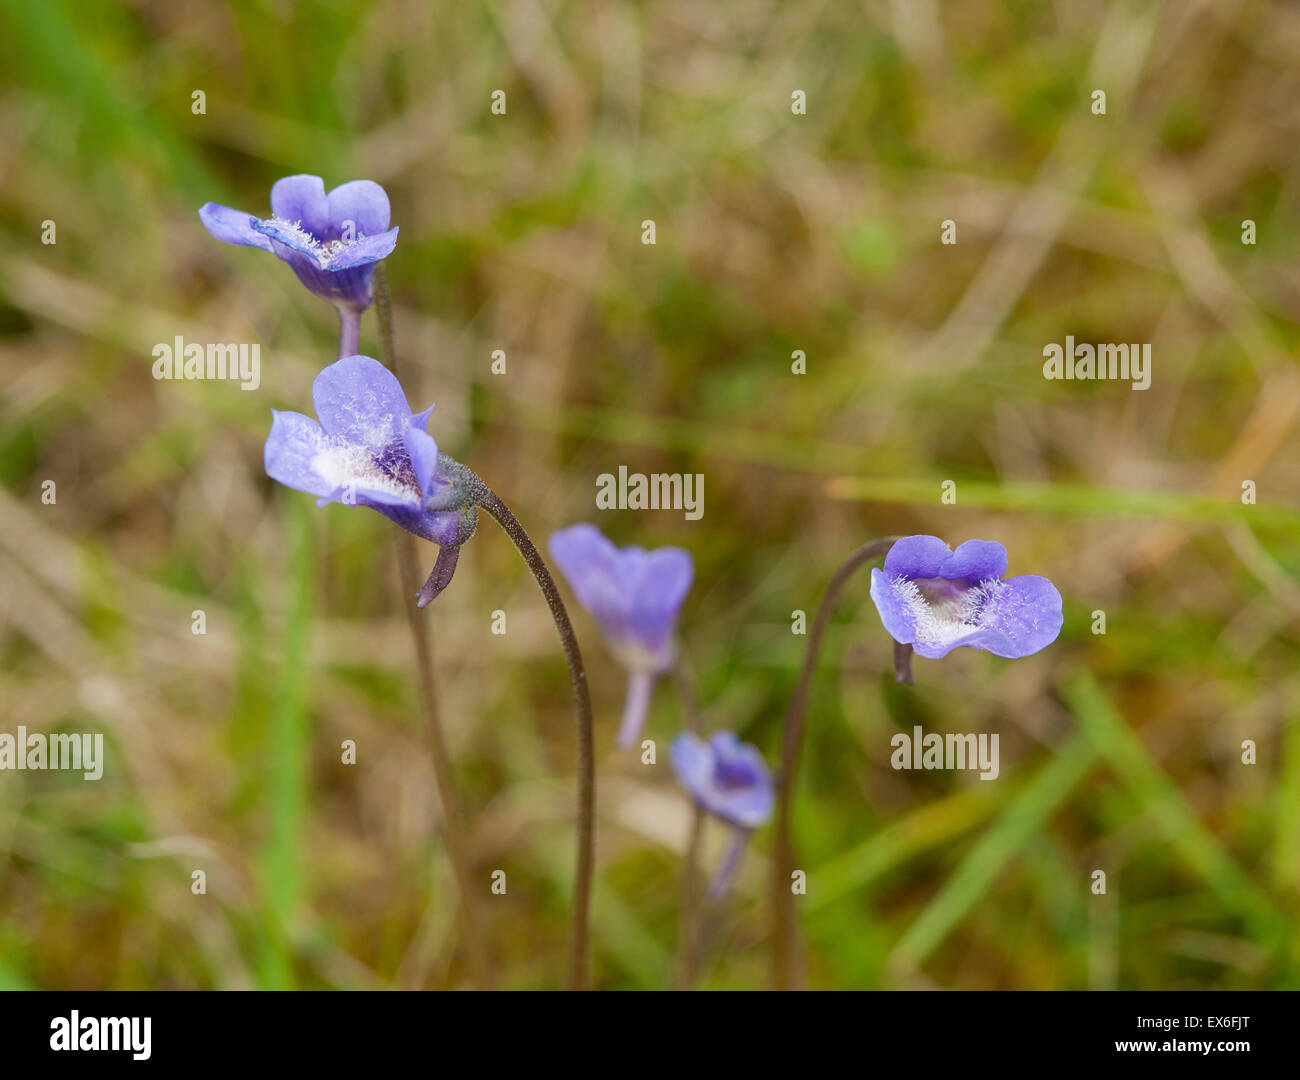 Common butterwort (Pinguicula vulgaris) compensates for poor soil by digesting insects held on sticky leaves.  SCO 9921. Stock Photo